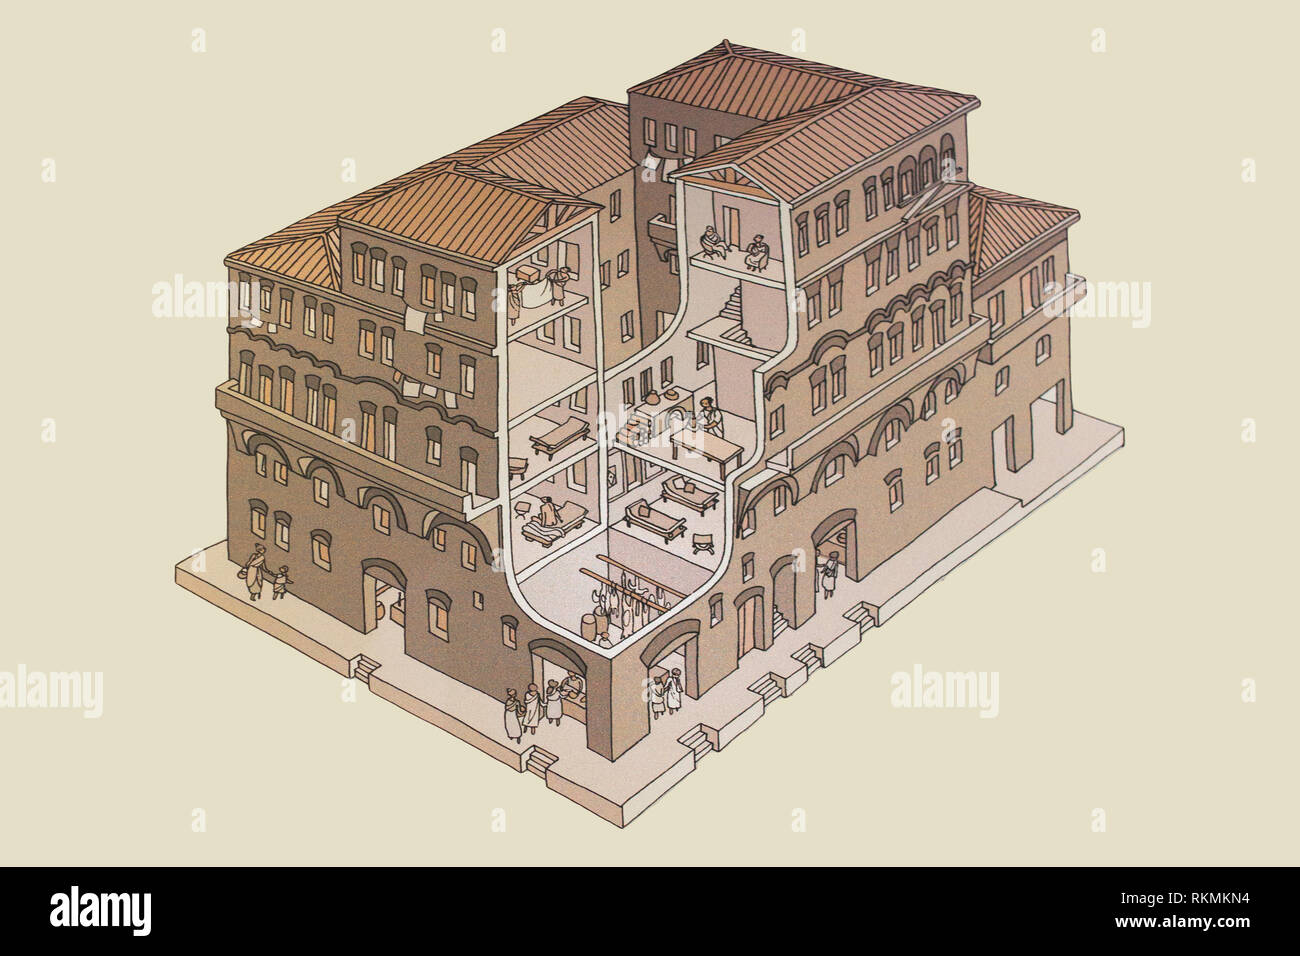 Cordoba, Spain - July 14th, 2017: Roman Insulae or apartment building. Historical reconstruction drawing at Archaeological Museum of Cordoba, Spain Stock Photo